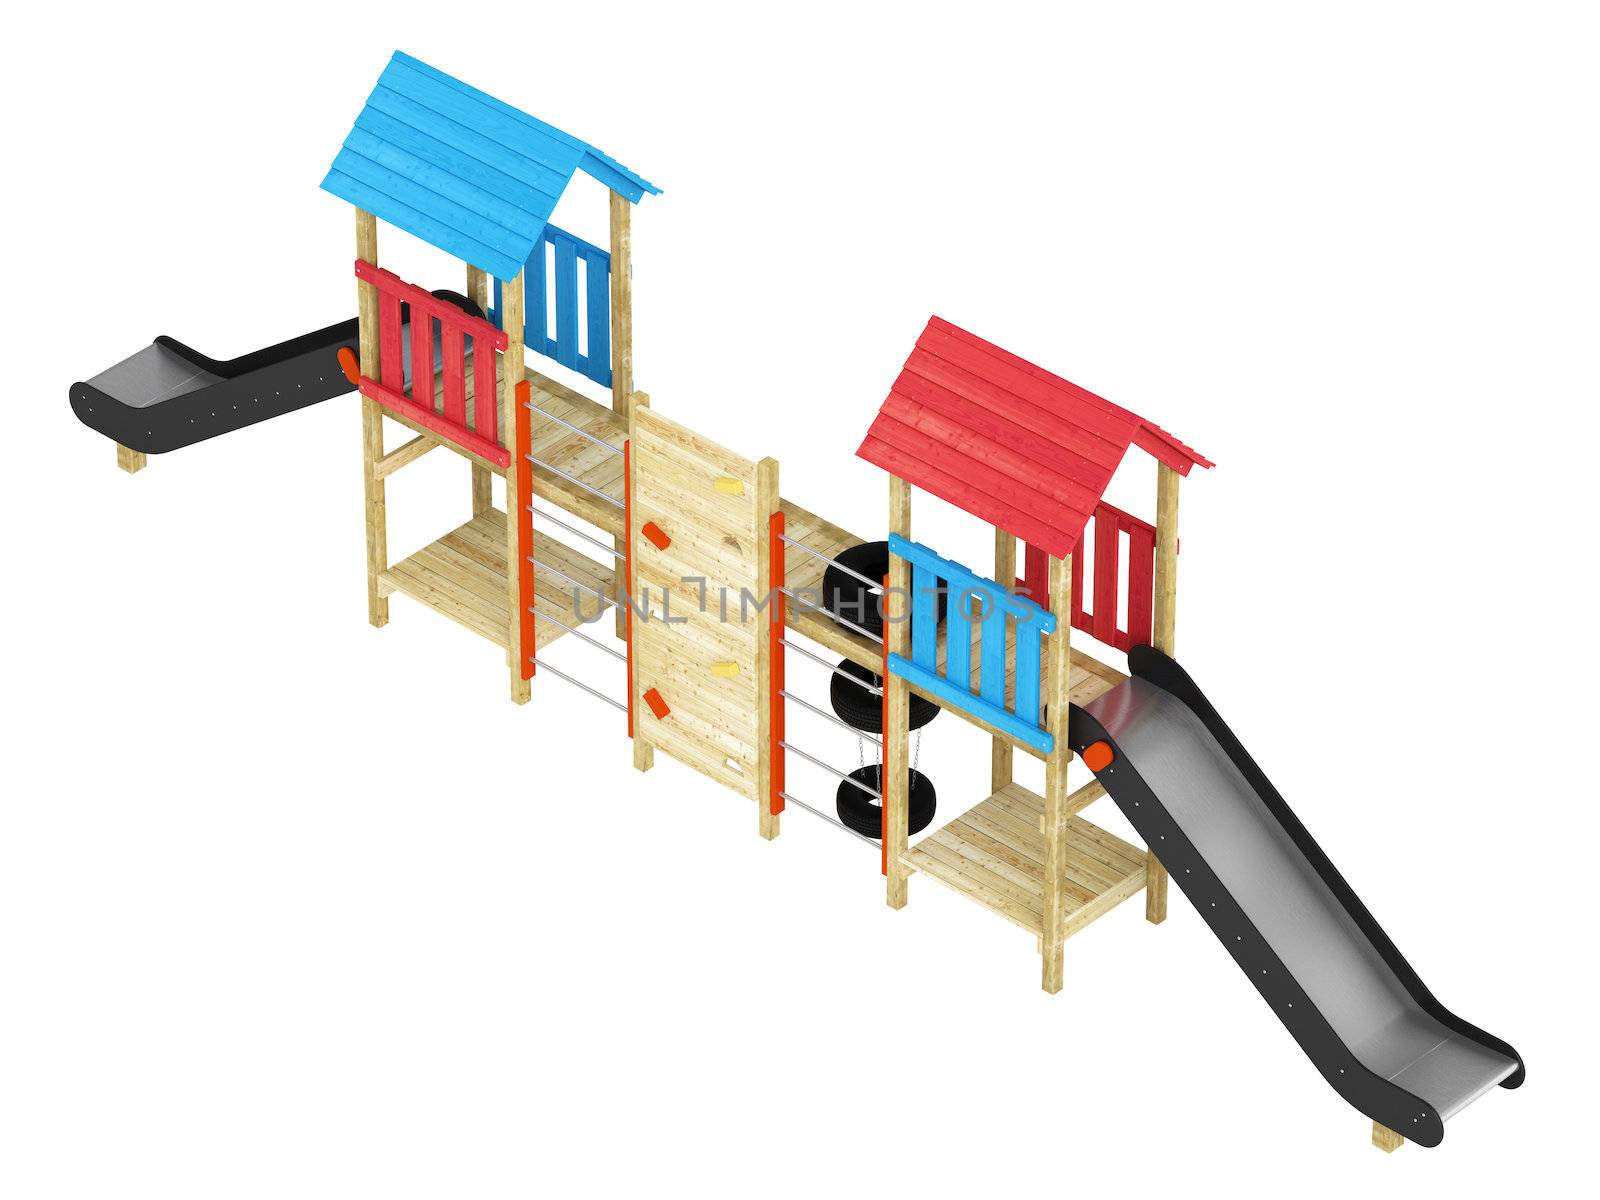 Roofed wooden structure with a double slide for childrens playground isolated on a white background